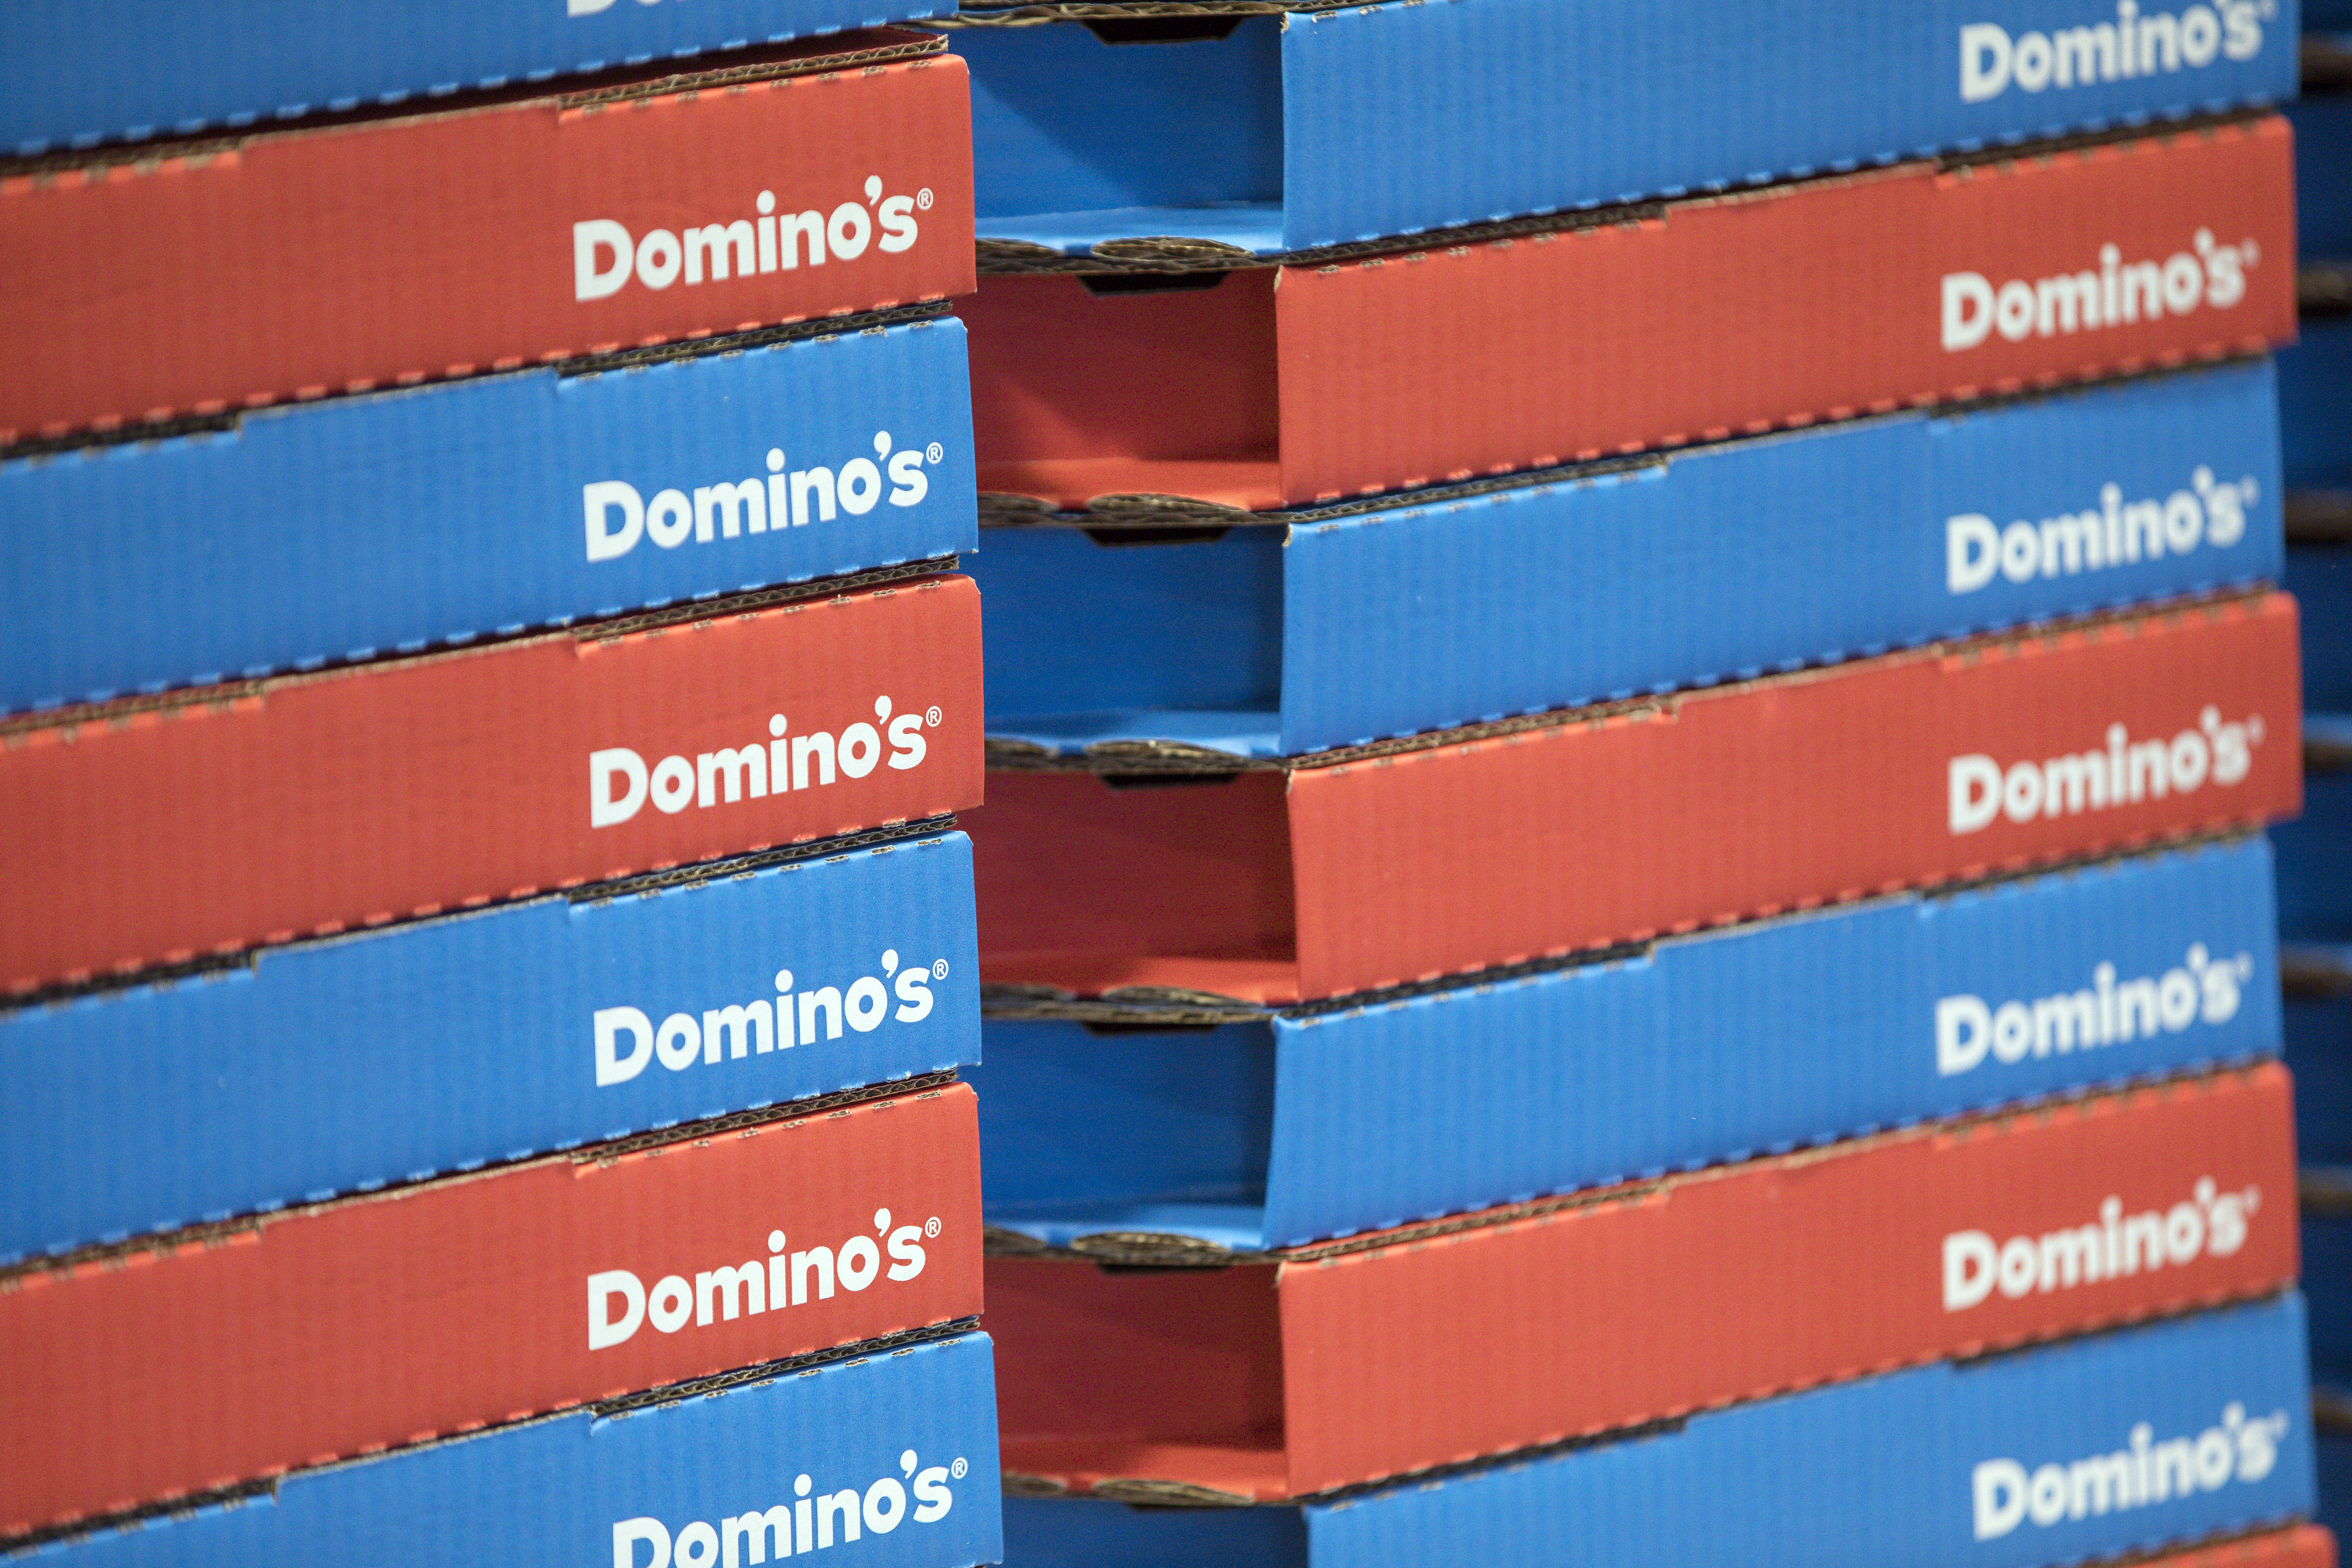 Domino's will deliver pizzas using self-driving cars very soon